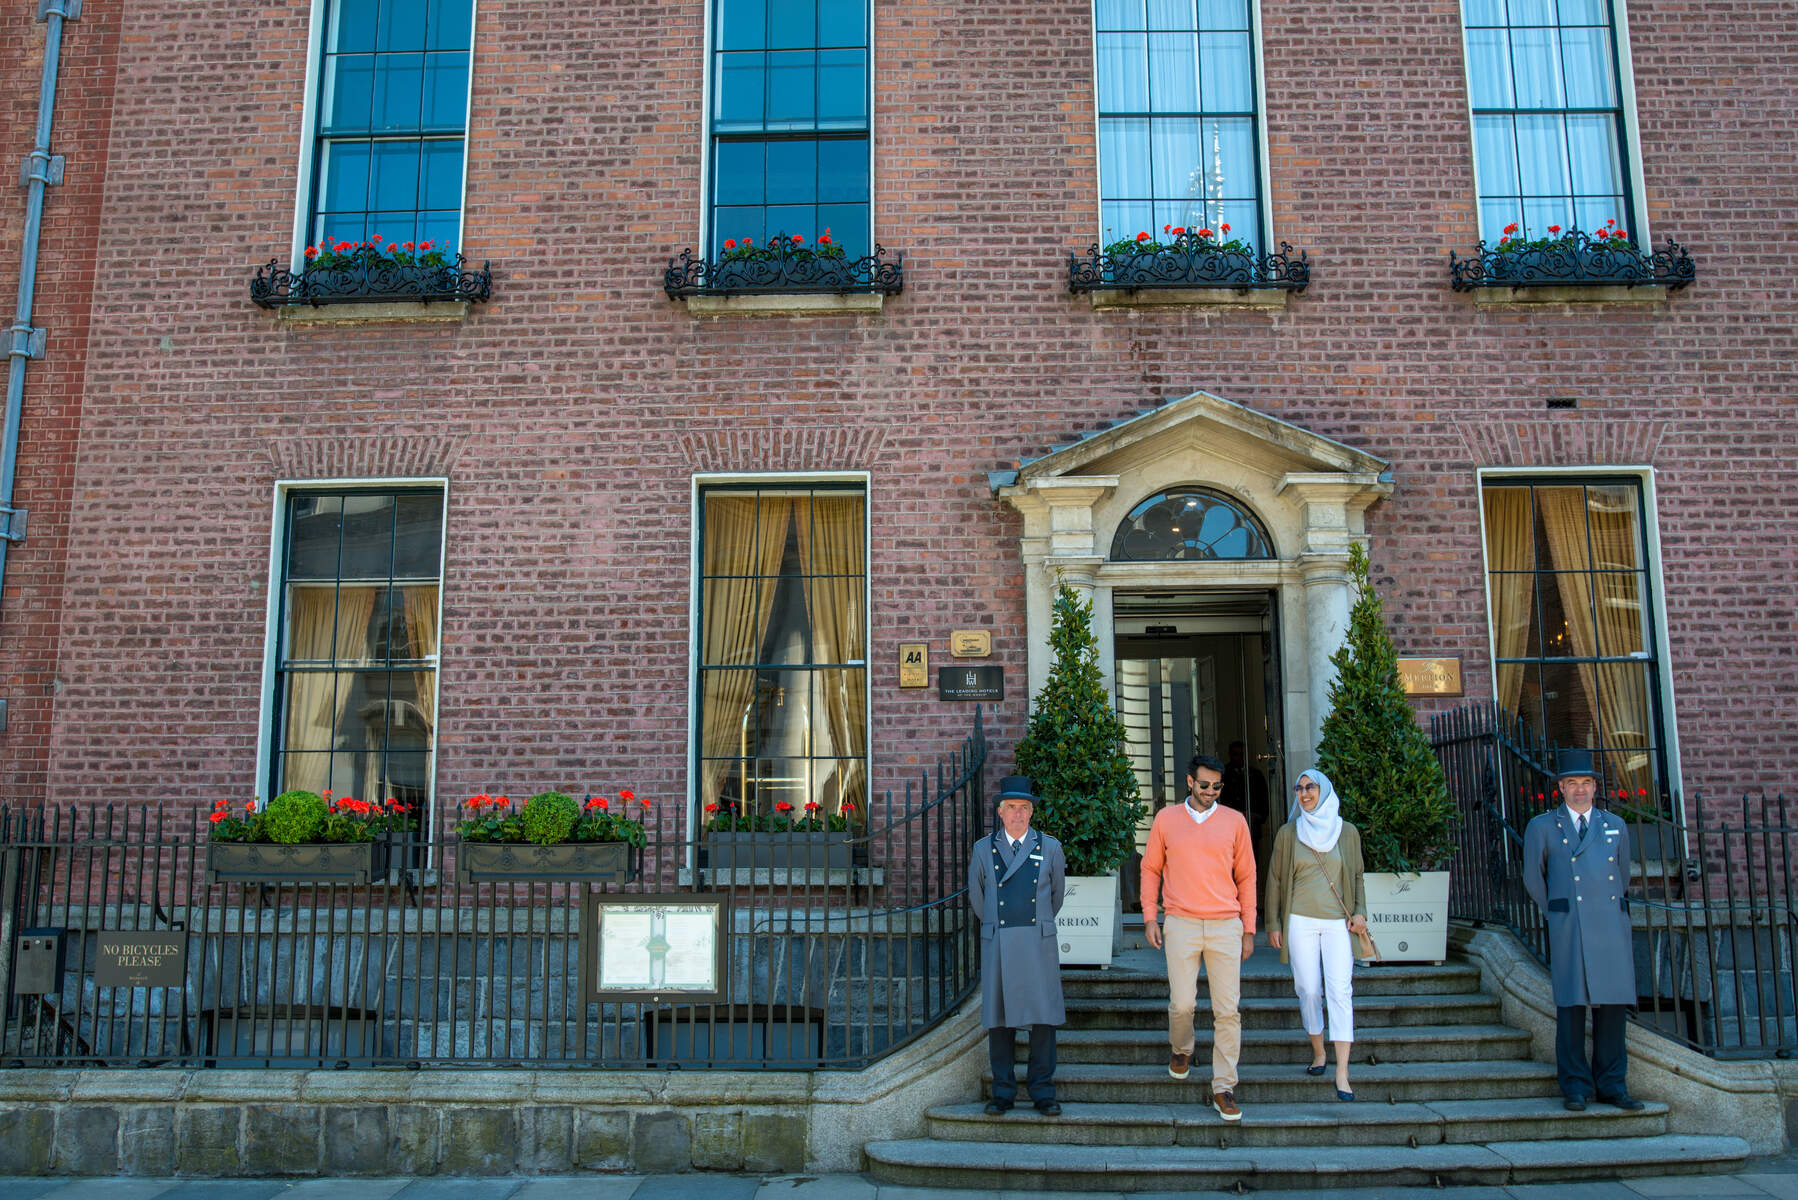 Exterior of The Merrion Hotel in Dublin, with a couple walking down stairs flanked by two uniformed doormen.